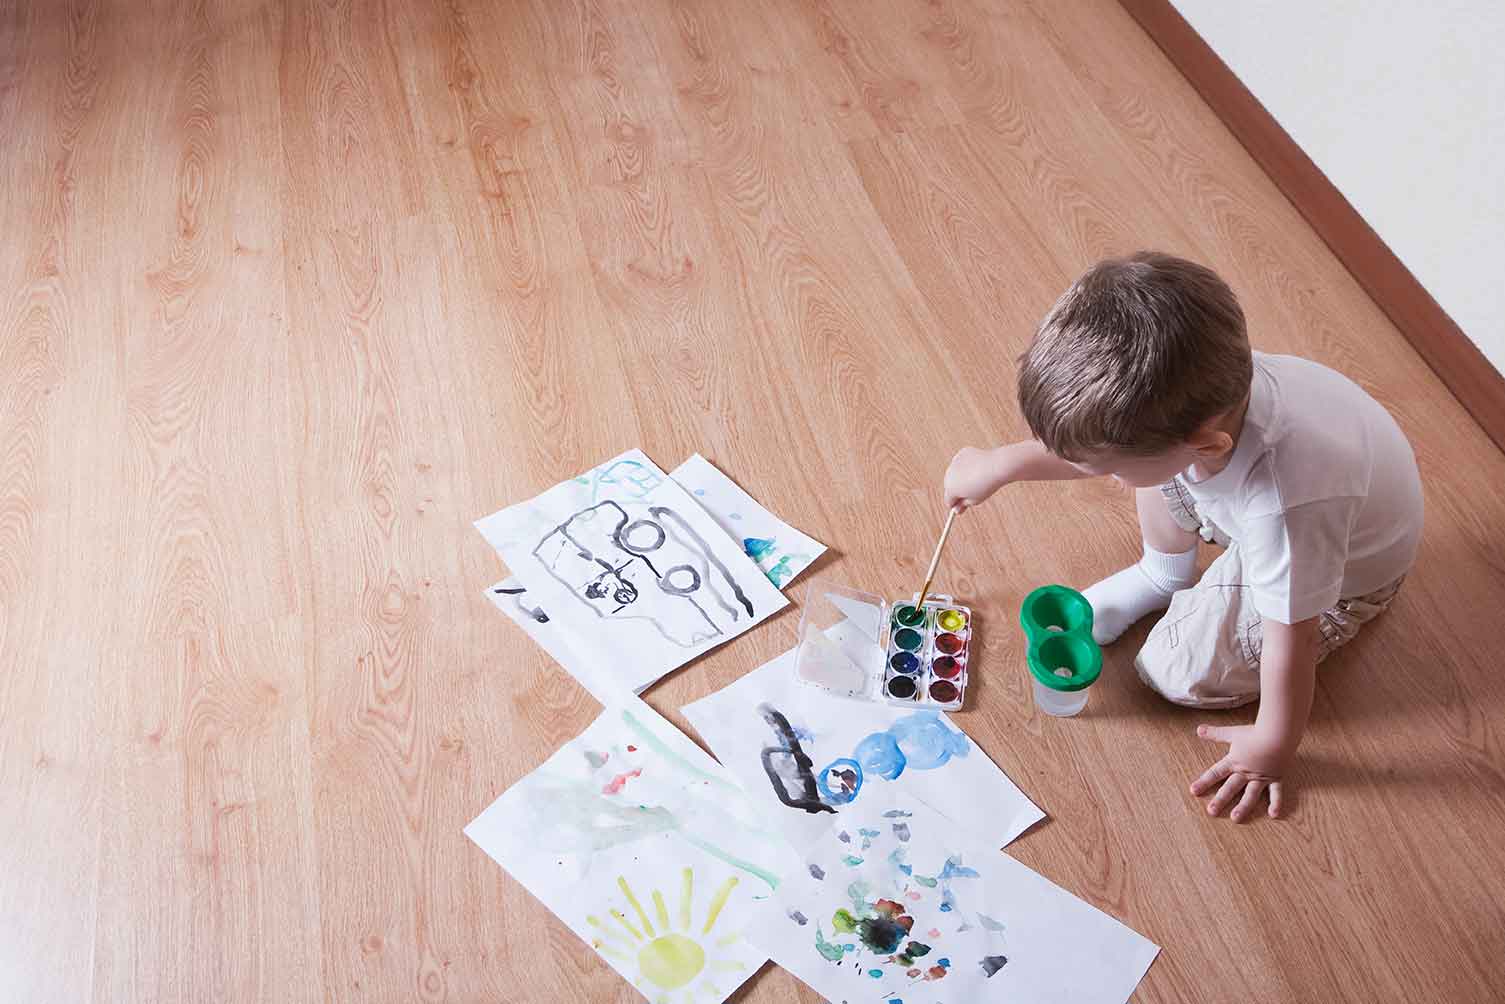 Little boy drawing a picture on the floor | Derailed Commodity Flooring & Furniture